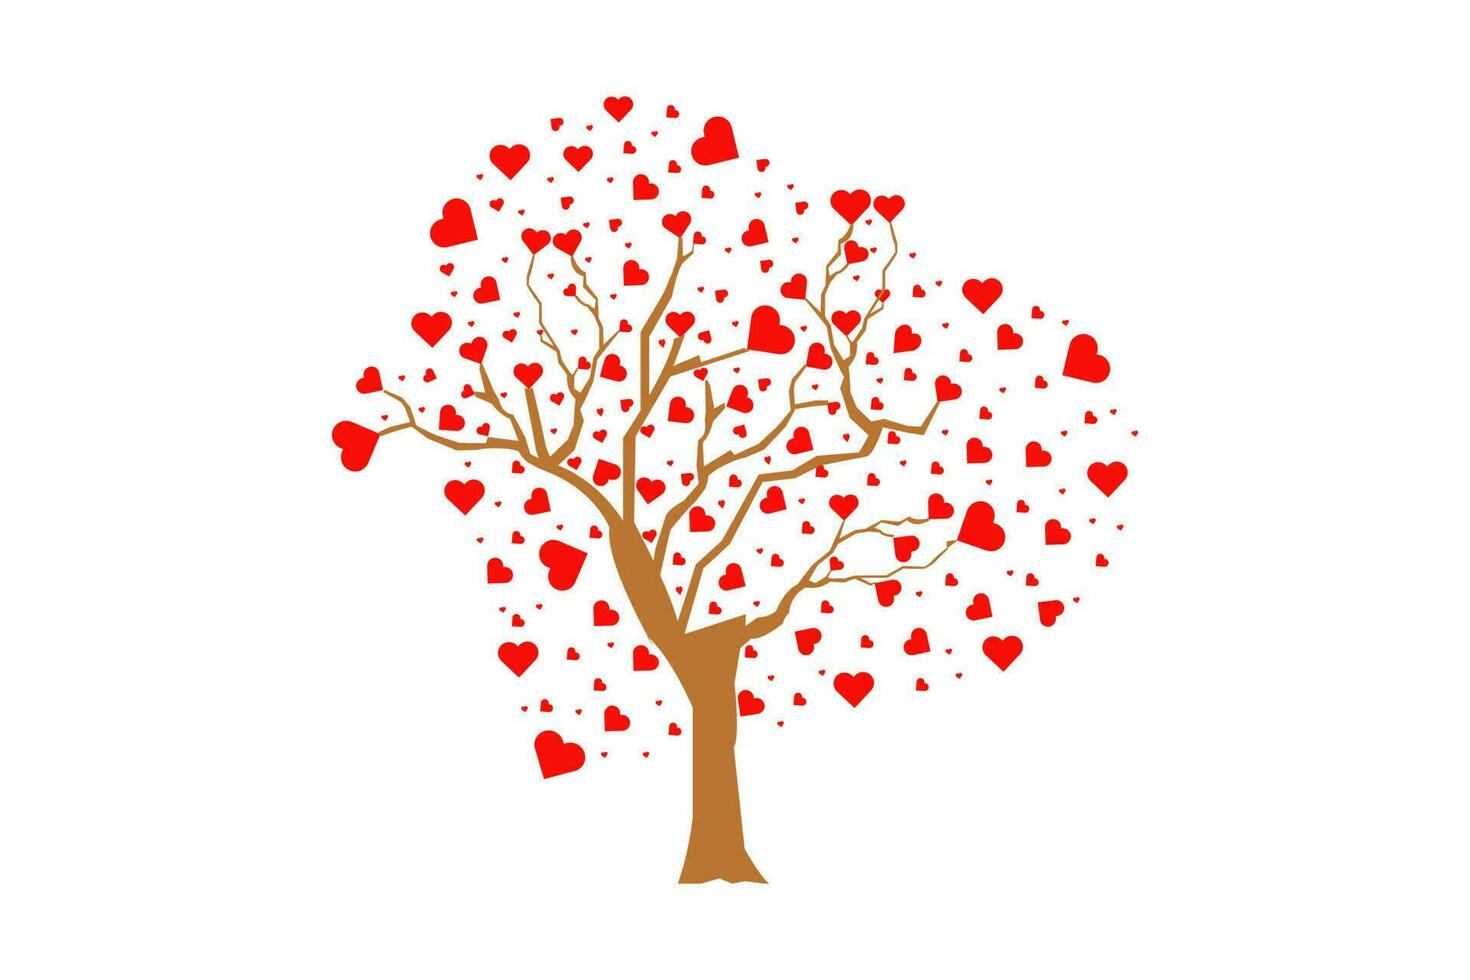 Illustration of Love Tree with Heart Leaves vector